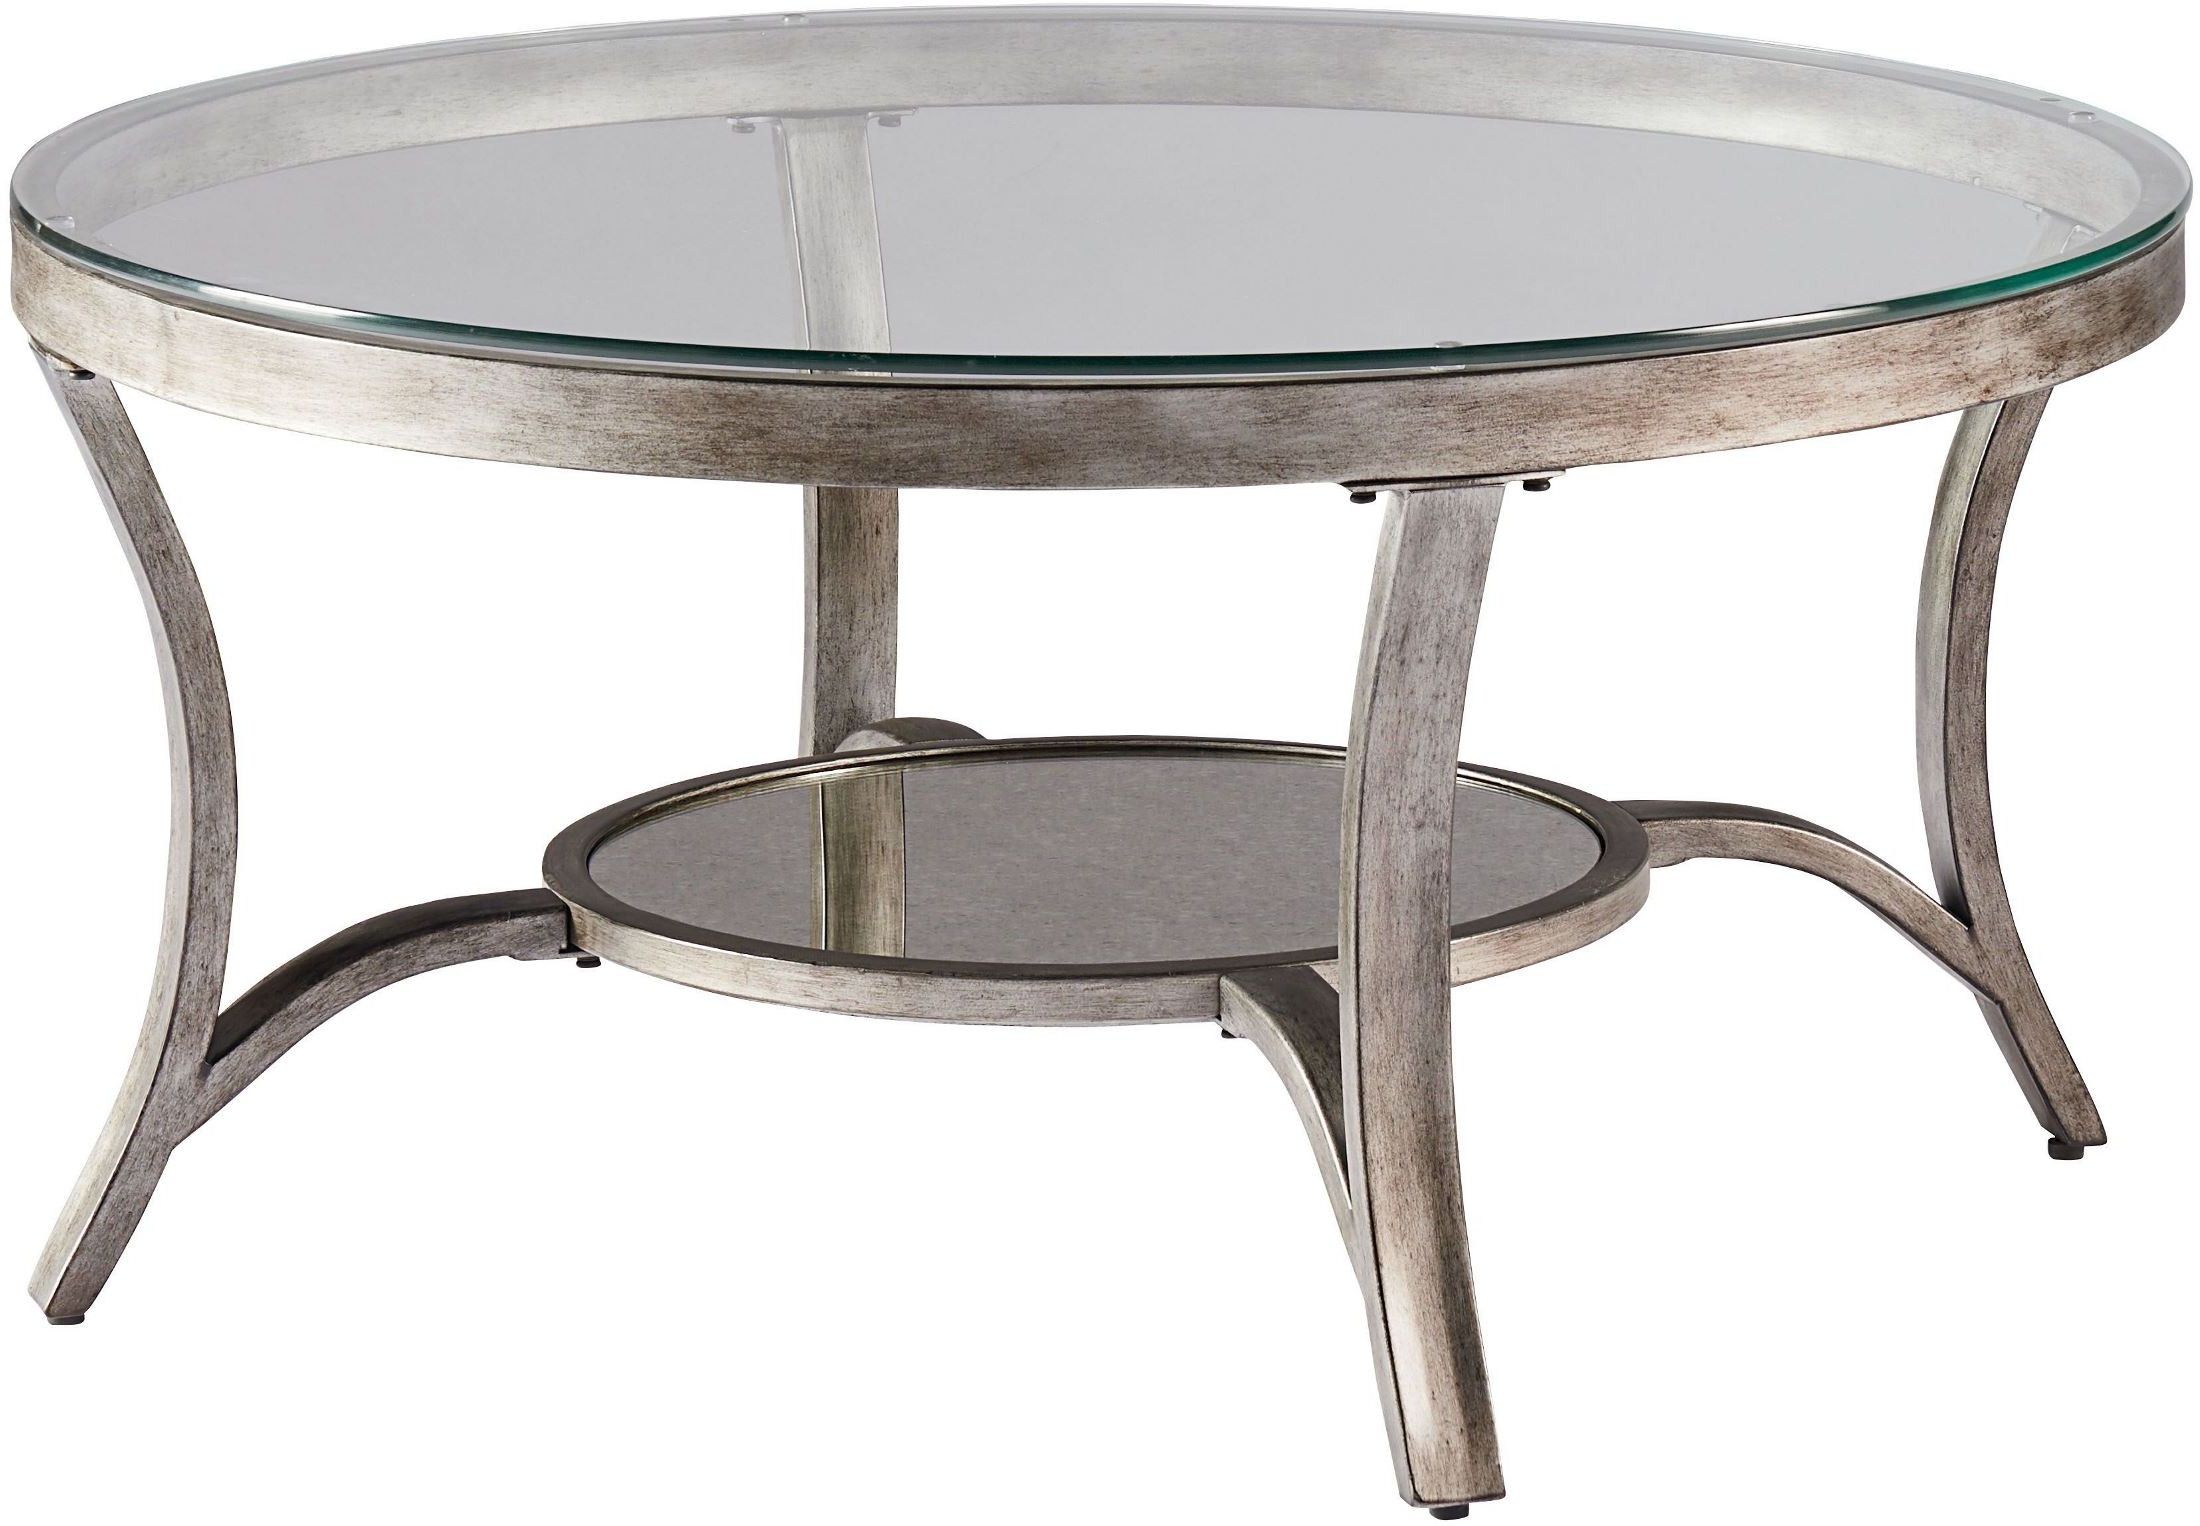 Widely Used Metallic Silver Cocktail Tables Regarding Cole Champagne Metal Cocktail Table From Standard (View 10 of 20)